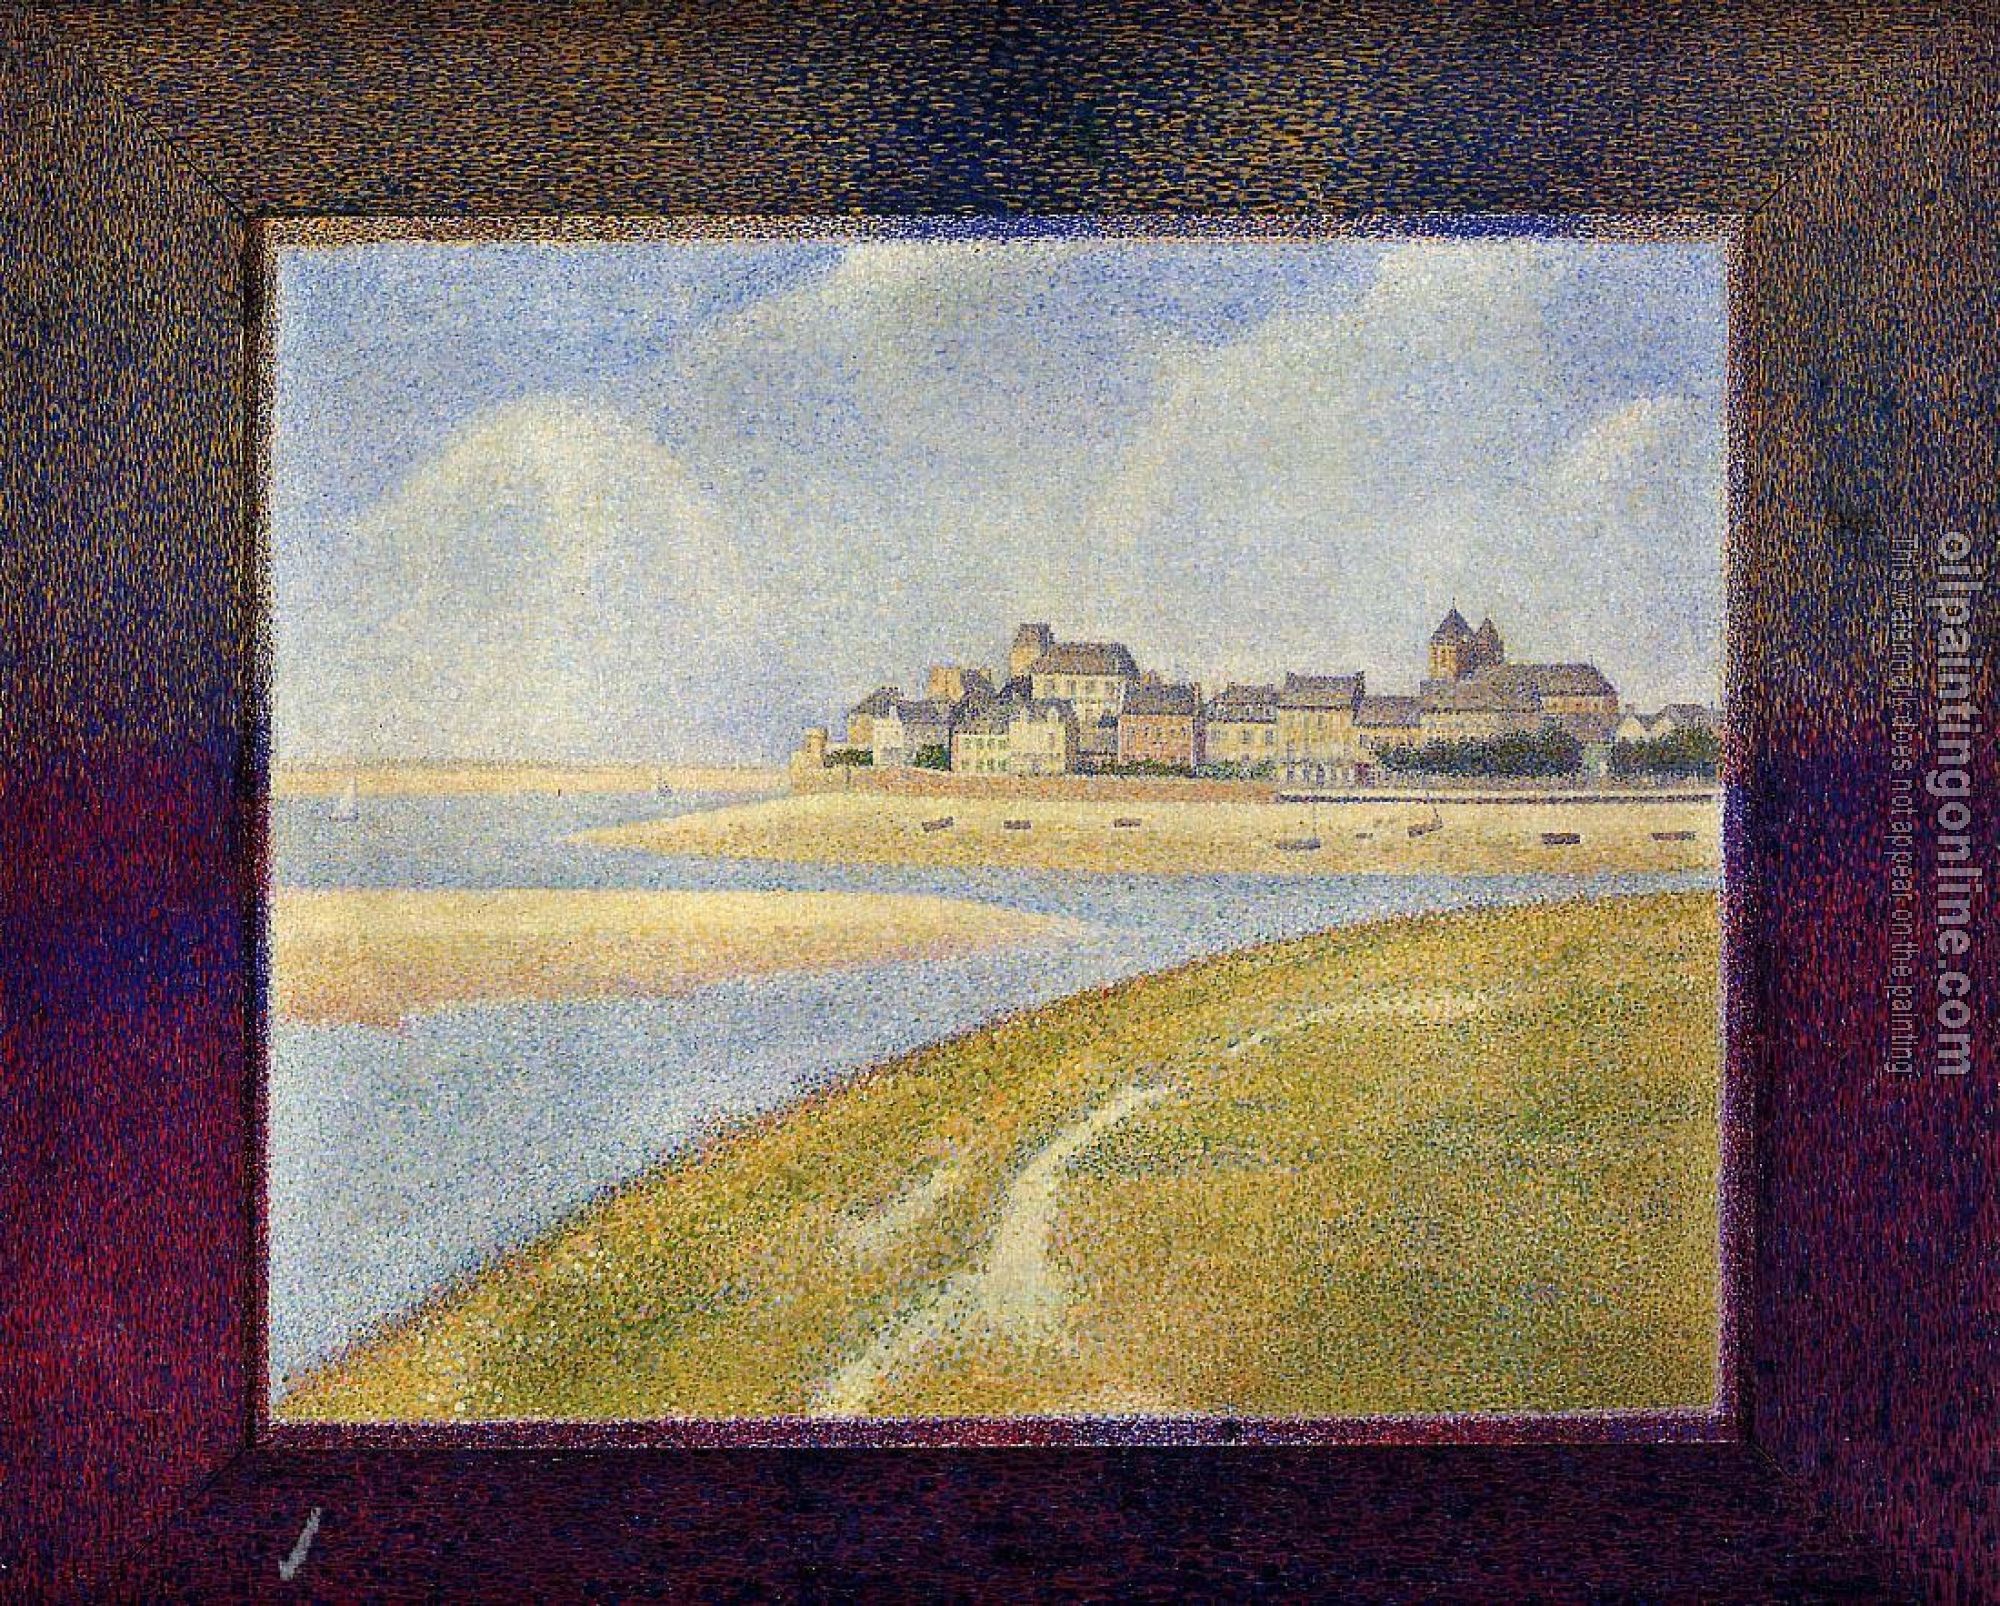 Seurat, Georges - Le Crotoy, Upstream